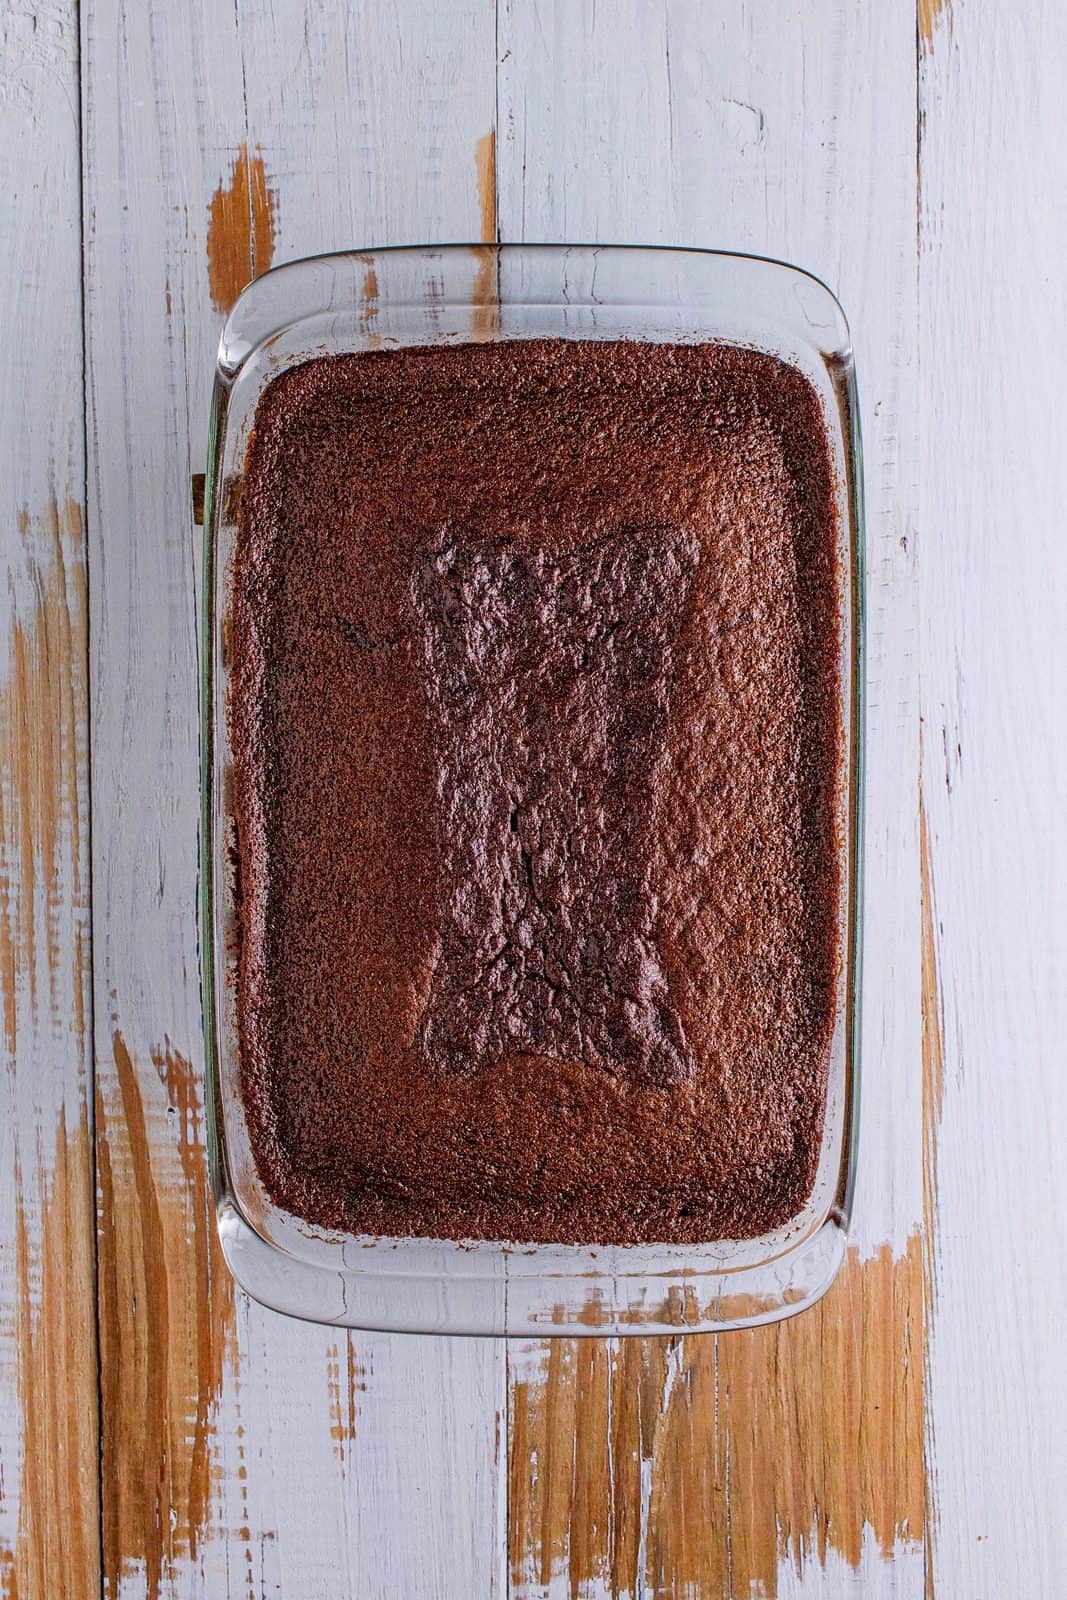 fully baked chocolate cake in a clear baking dish.